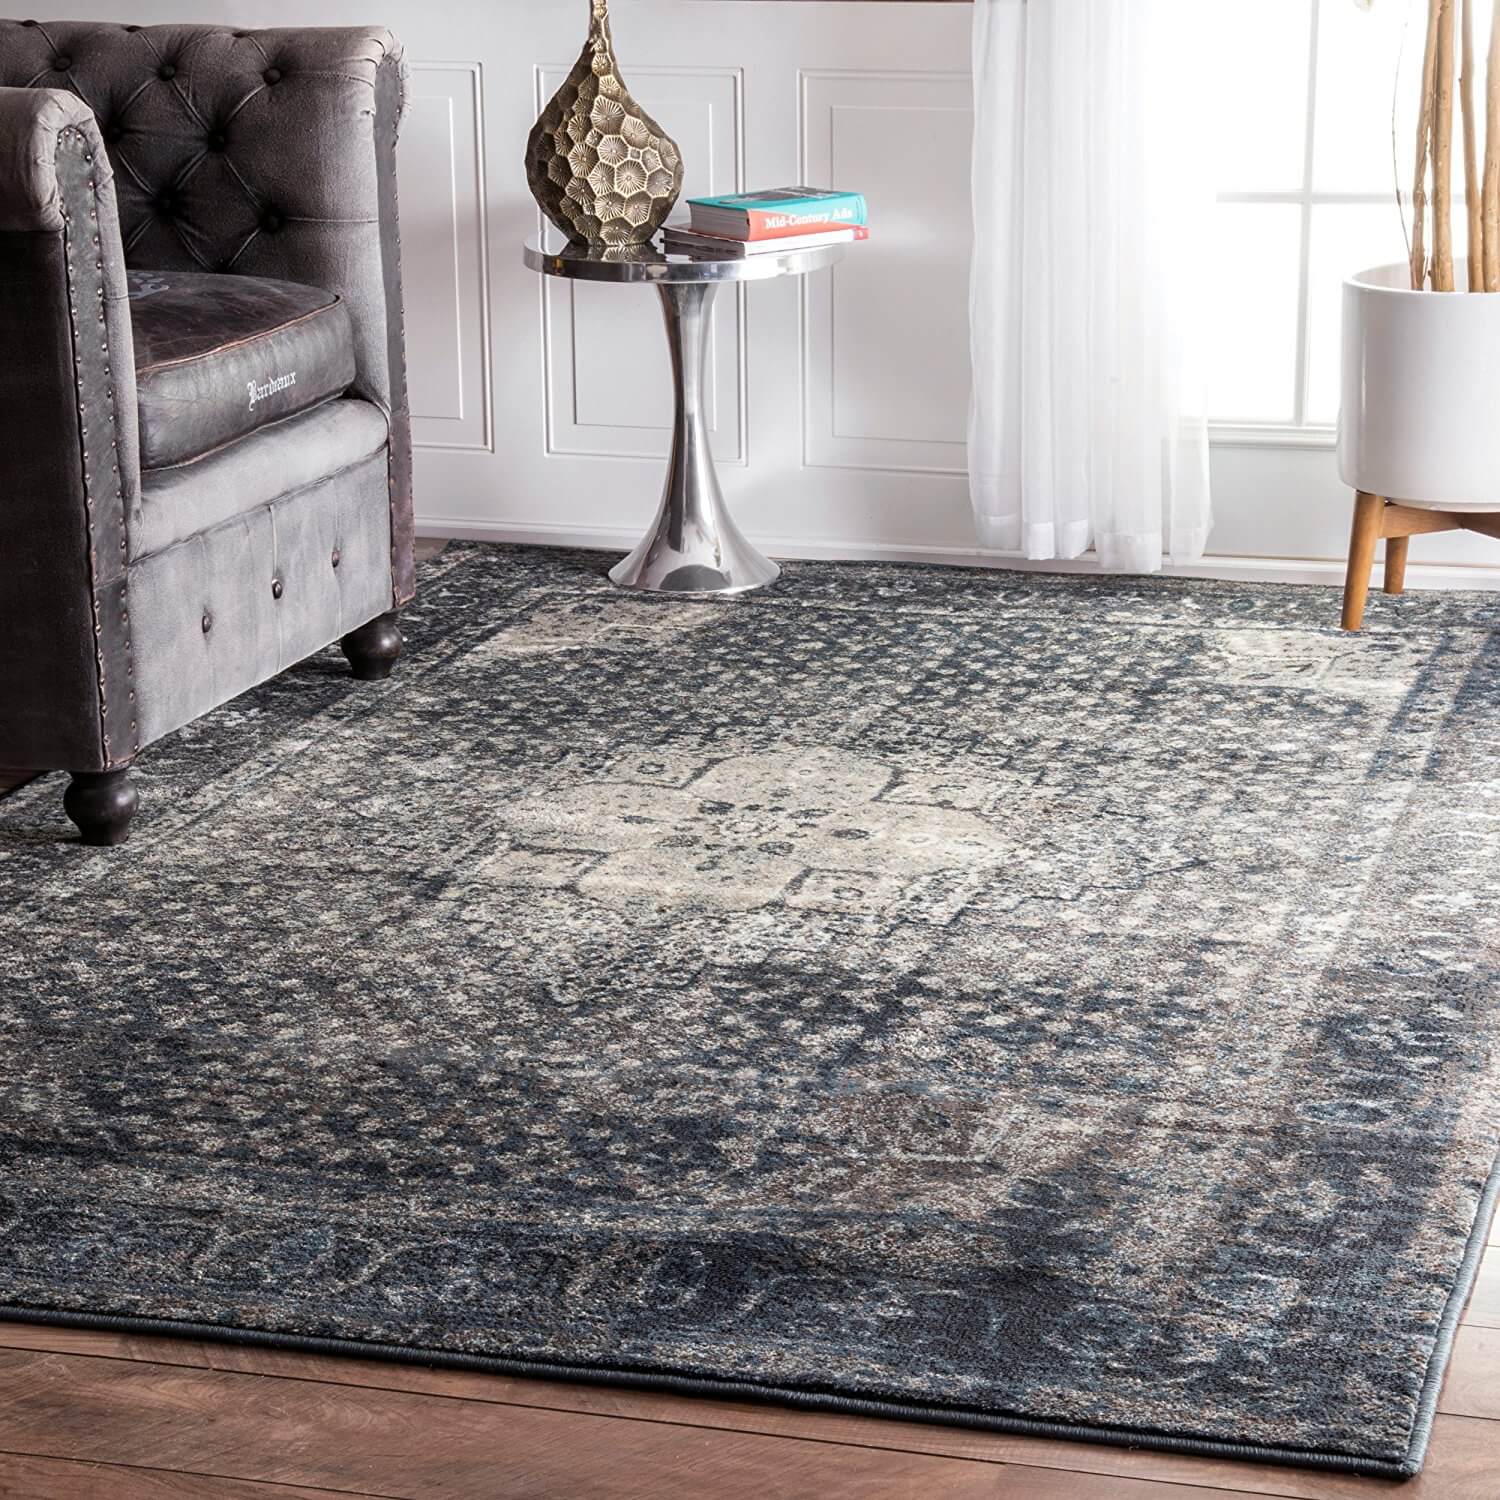 Helpful tips to help you find the perfect farmhouse style rug for your home!